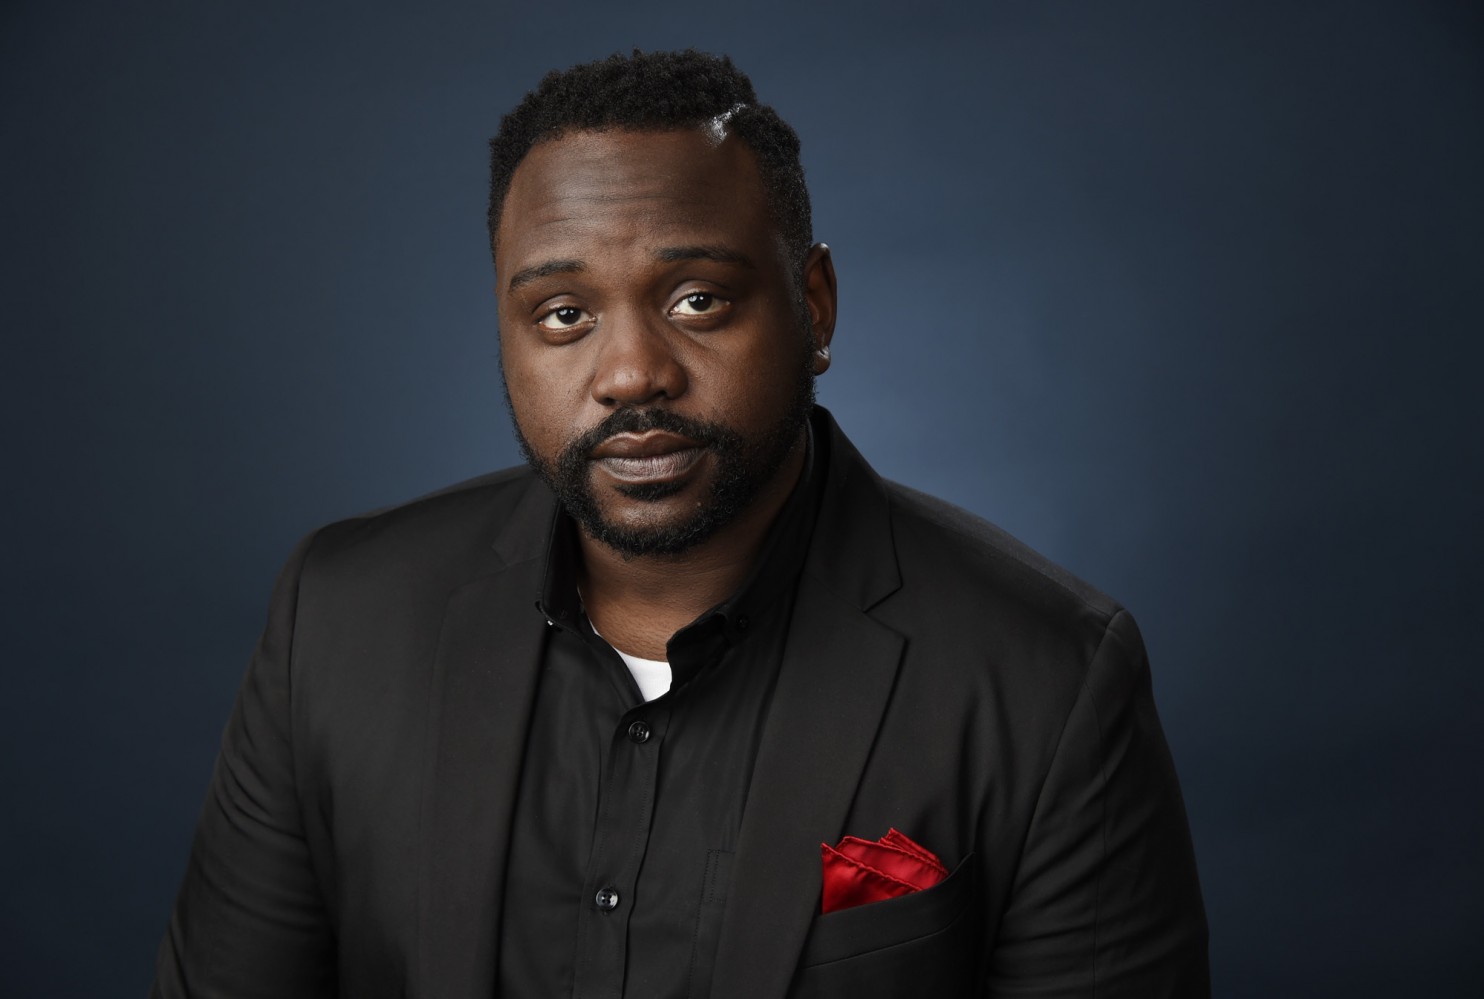 Brian Tyree Henry On The ‘N’ Word, Black/Latino Culture And ‘Paper Boi’